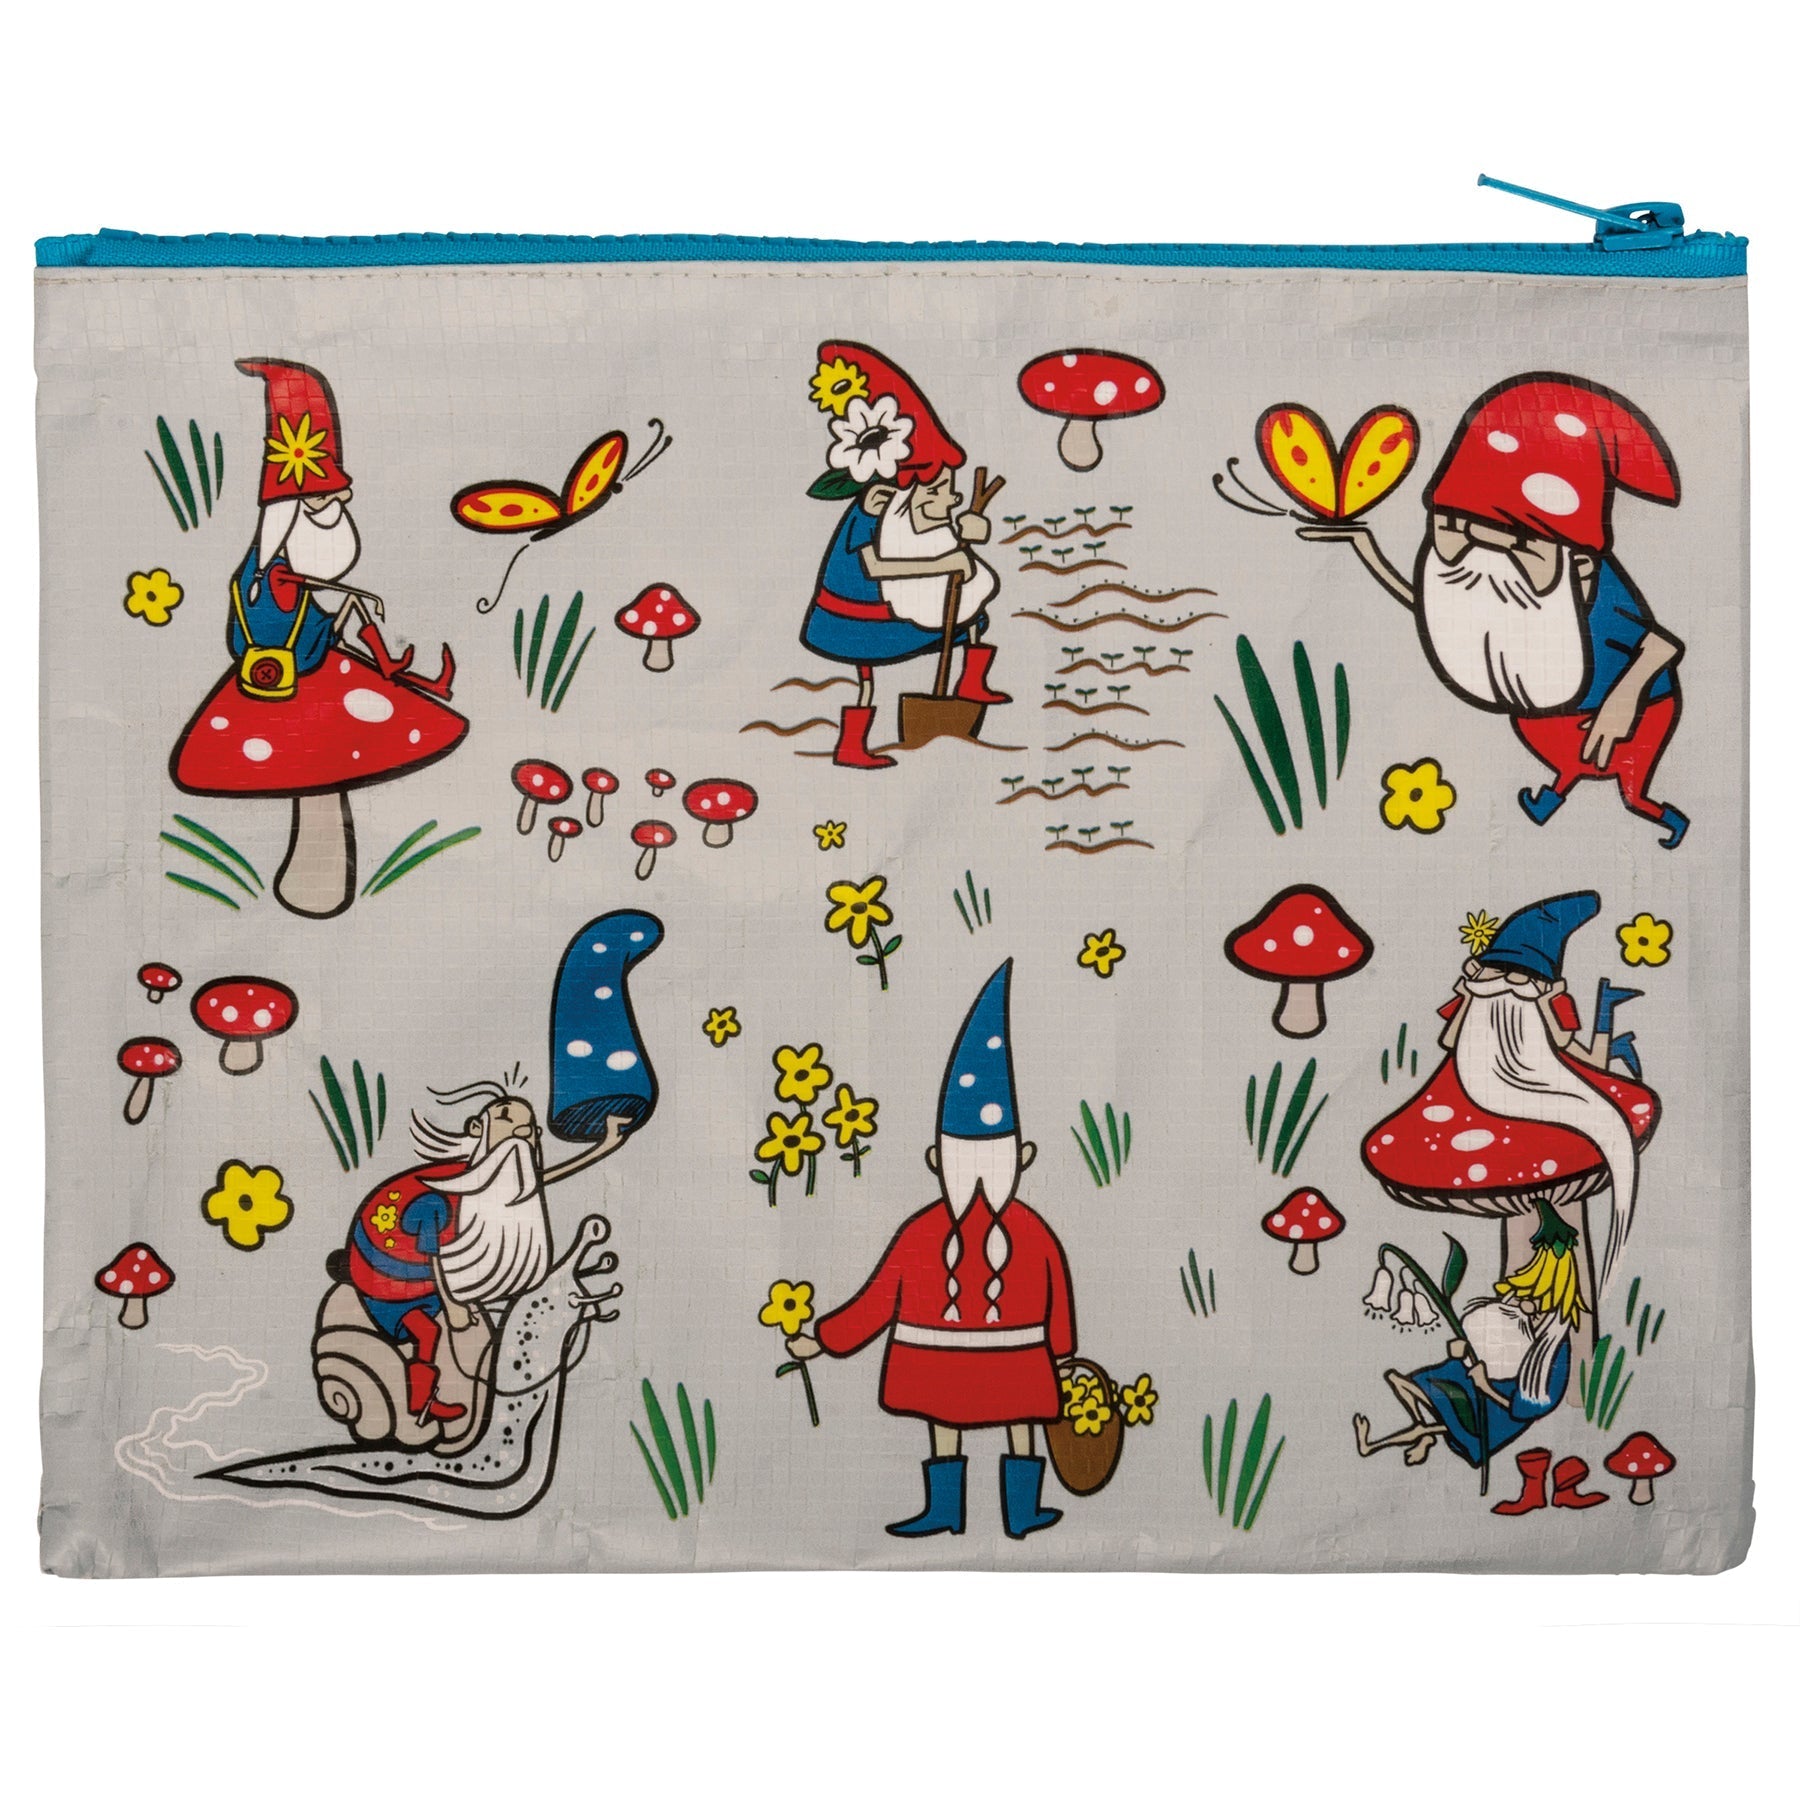 Gnomes Recycled Material Cute/Cool/Unique Zipper Pouch/Bag/Clutch/Cosmetic Bag | 9.5" x 7"